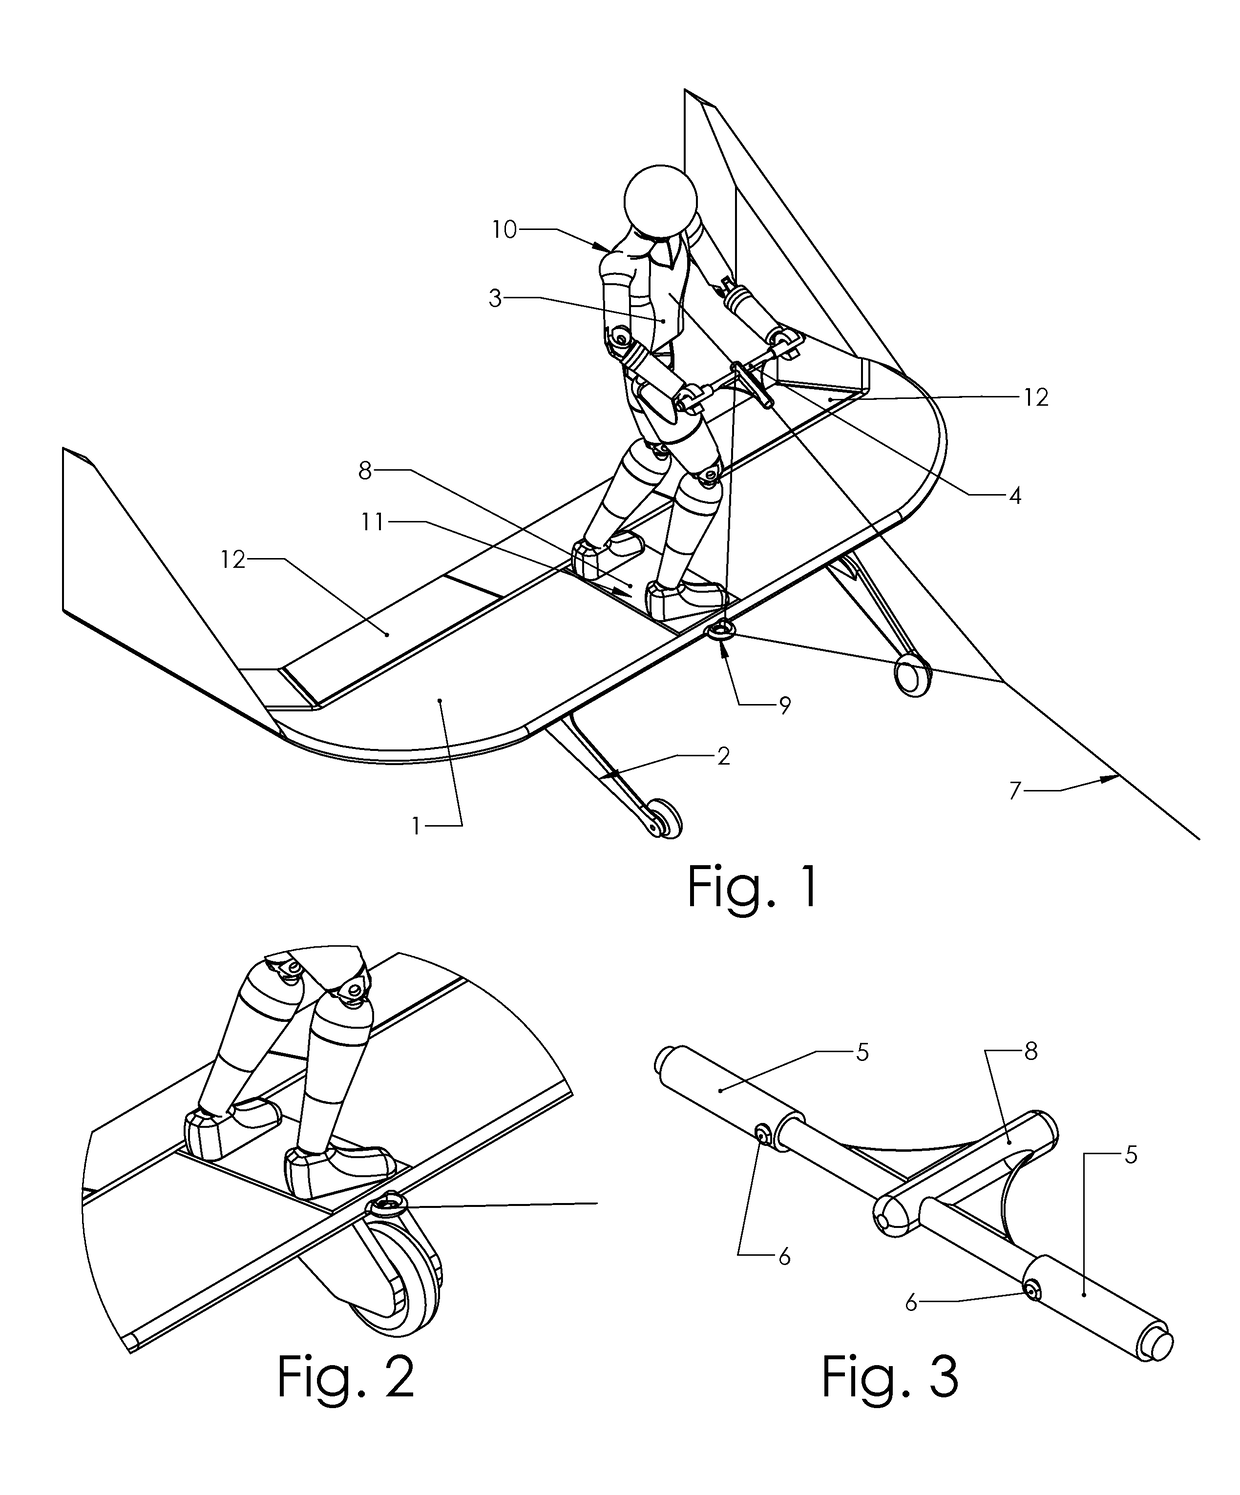 System for airboarding behind an aircraft